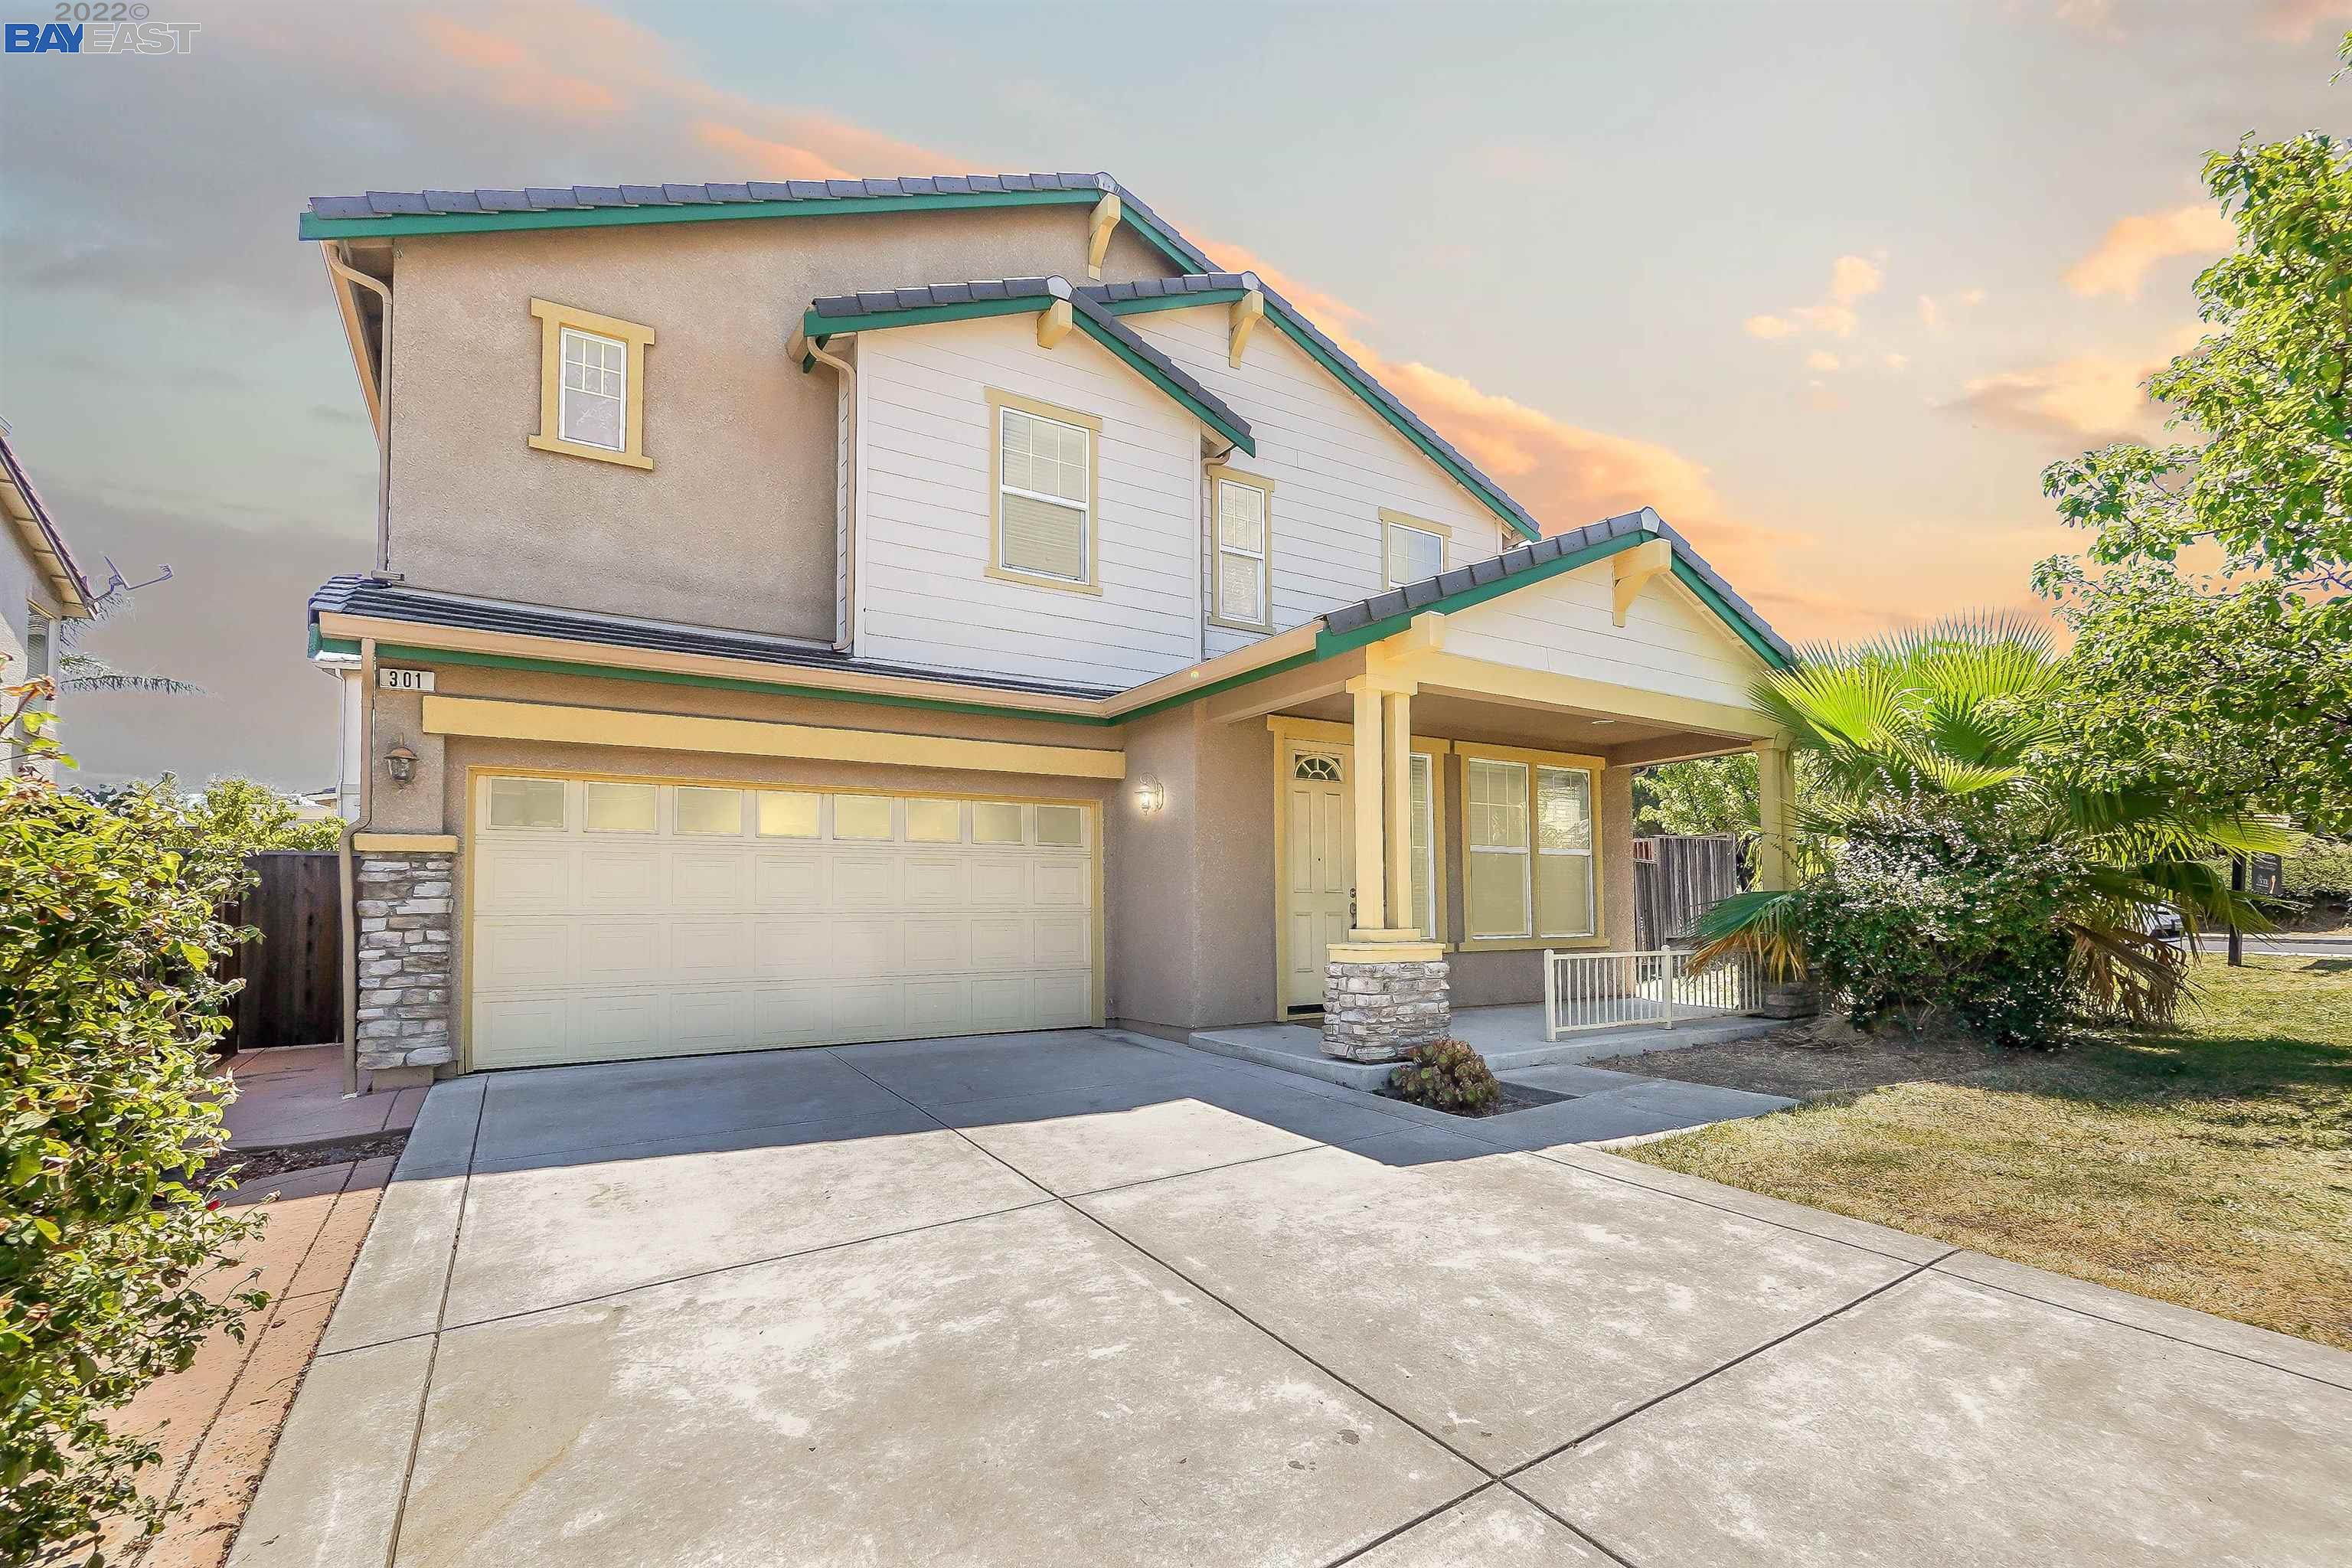 301 Boeger Pl, BAY POINT, CA 94565